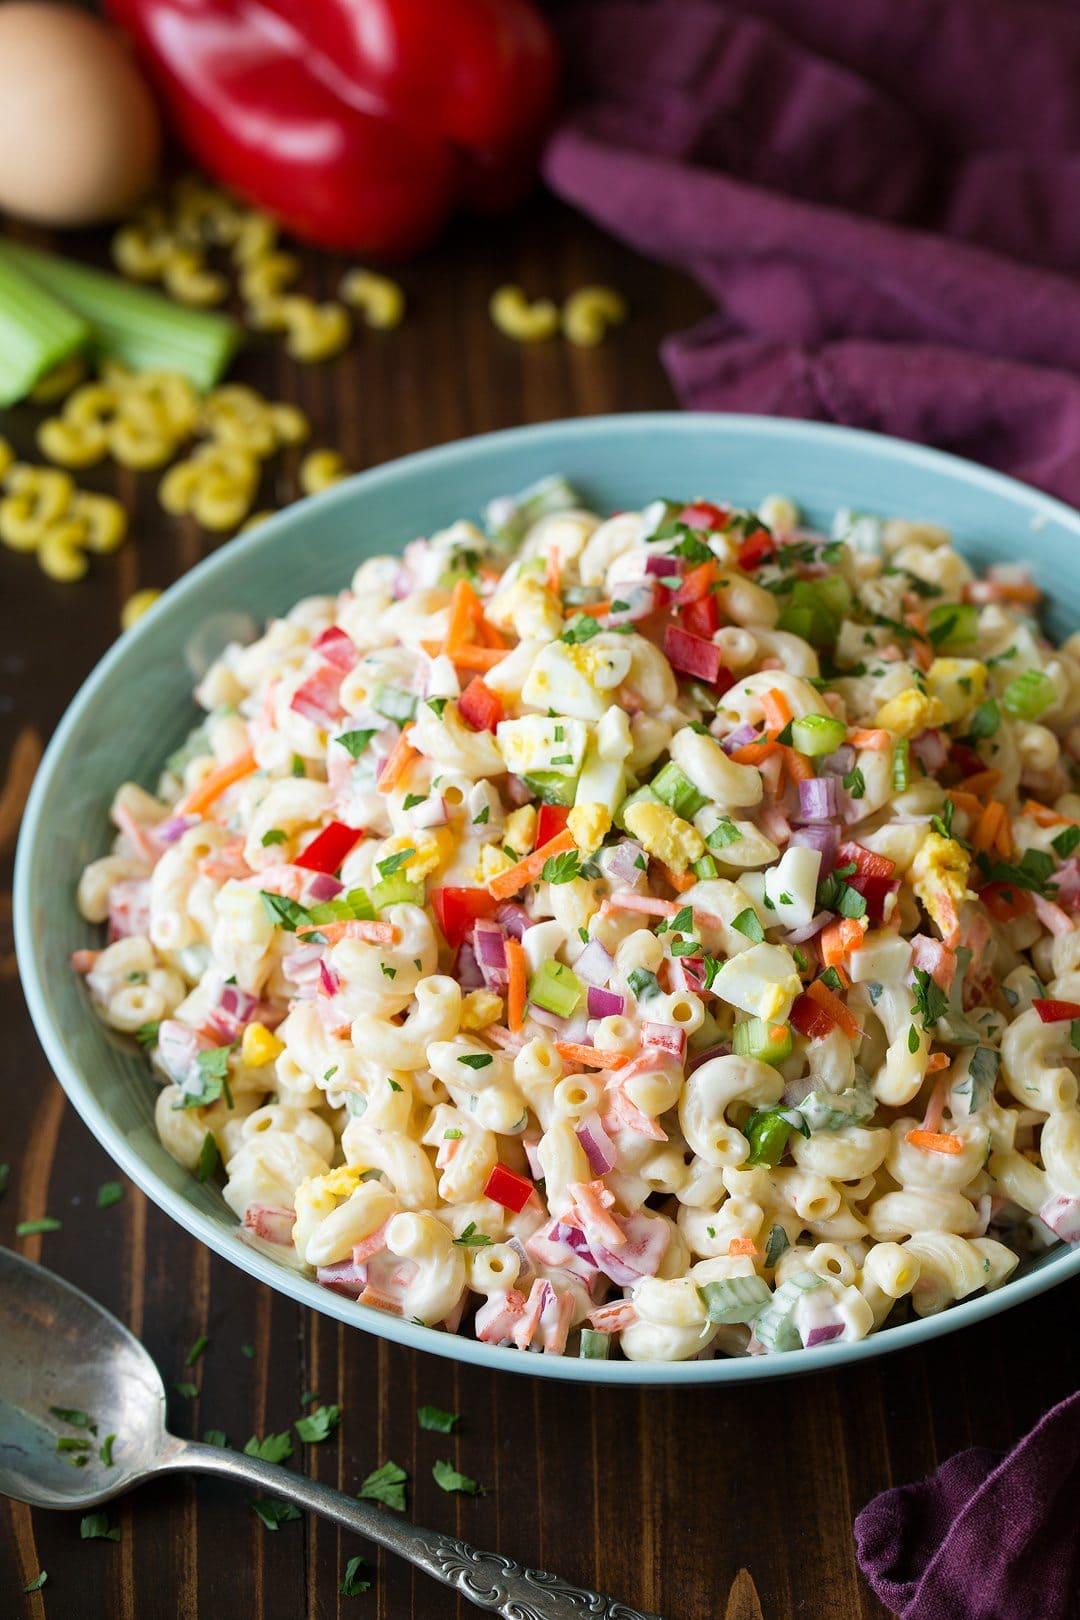 Serving dish of Macaroni Salad with red onion, celery, peppers, carrots and egg